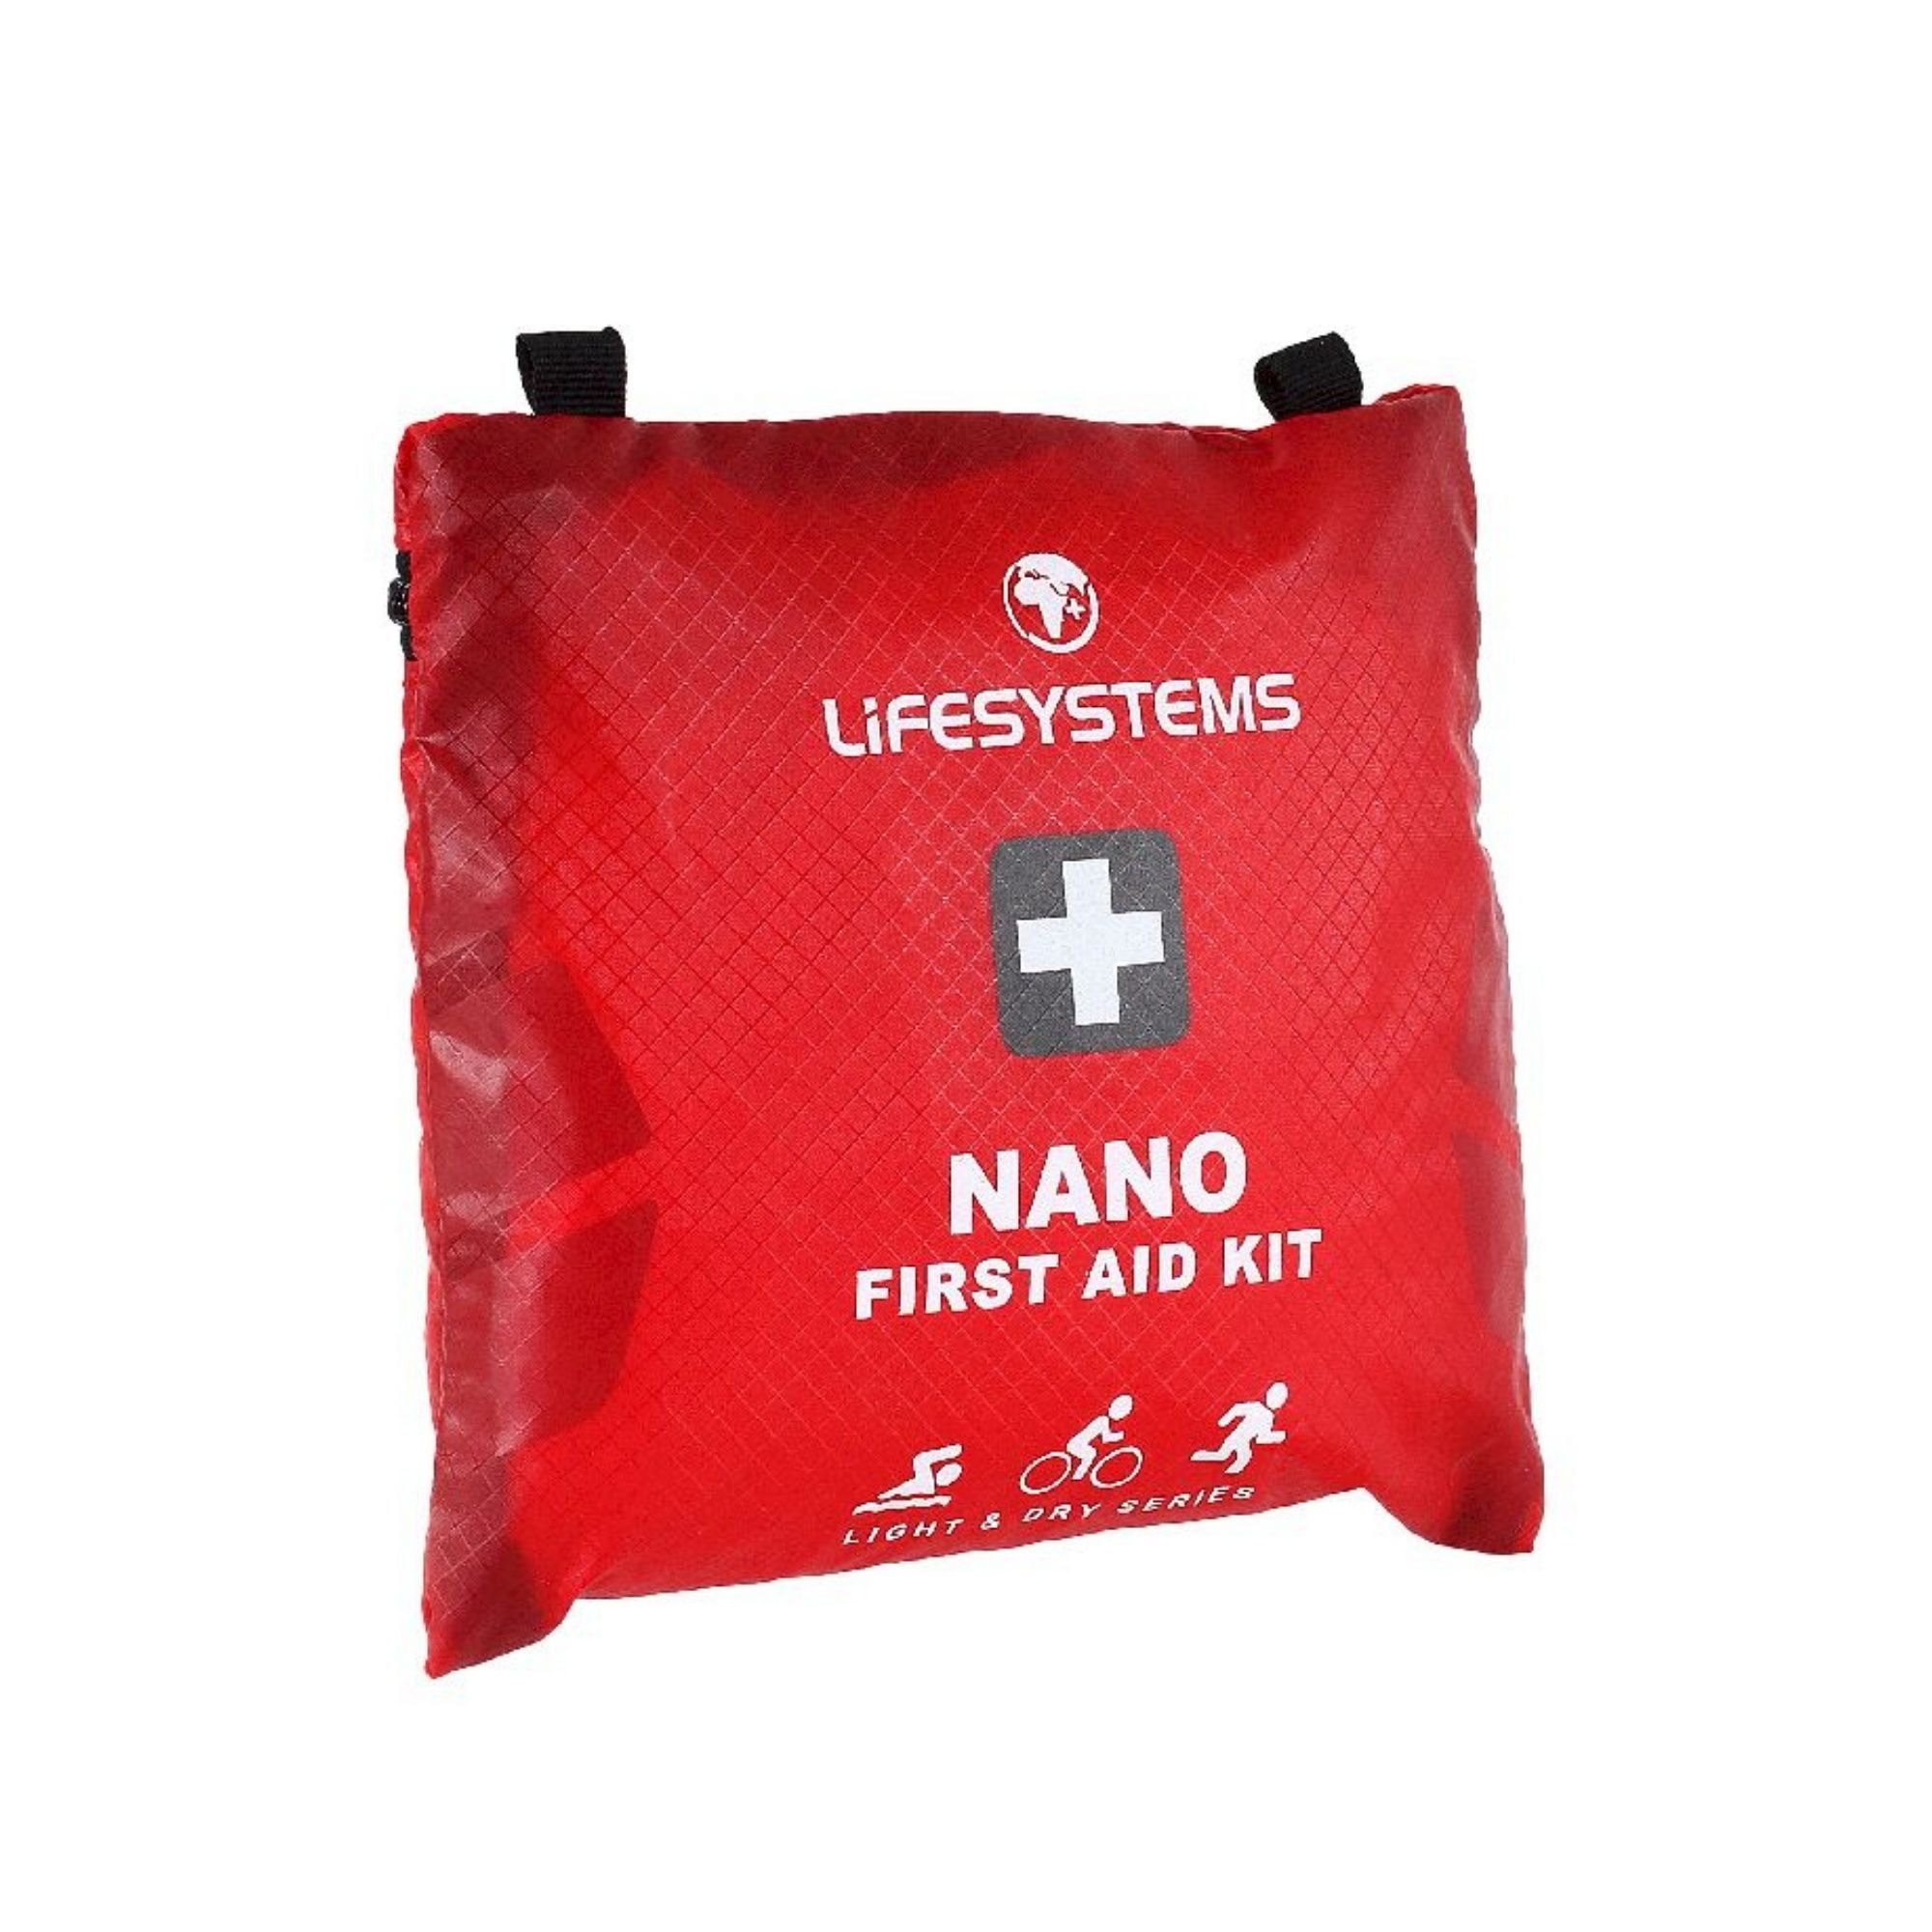 LittleLife Light & Dry Nano First Aid Kits - First aid kit